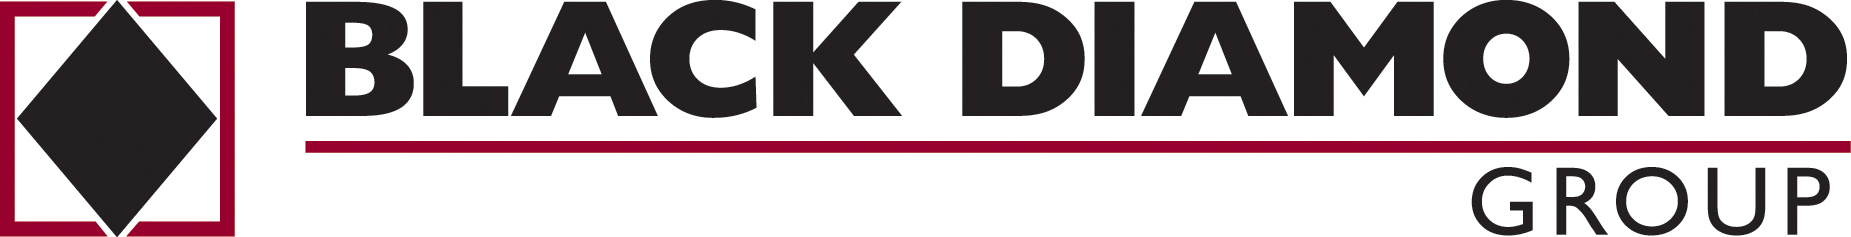 Black Diamond Reports Strong Fourth Quarter and Year-End